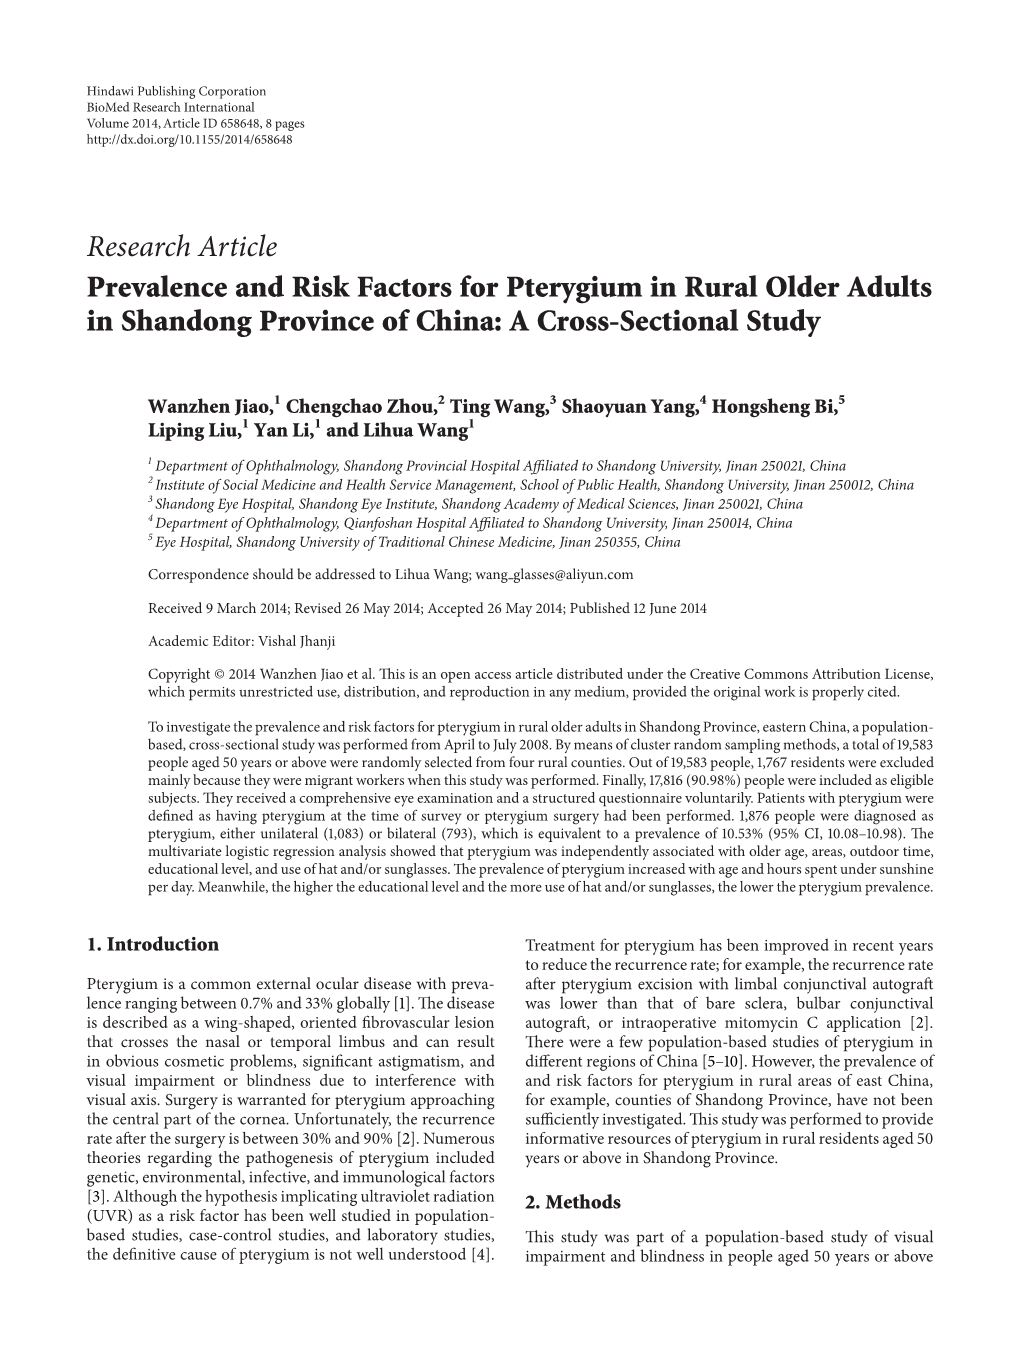 Prevalence and Risk Factors for Pterygium in Rural Older Adults in Shandong Province of China: a Cross-Sectional Study